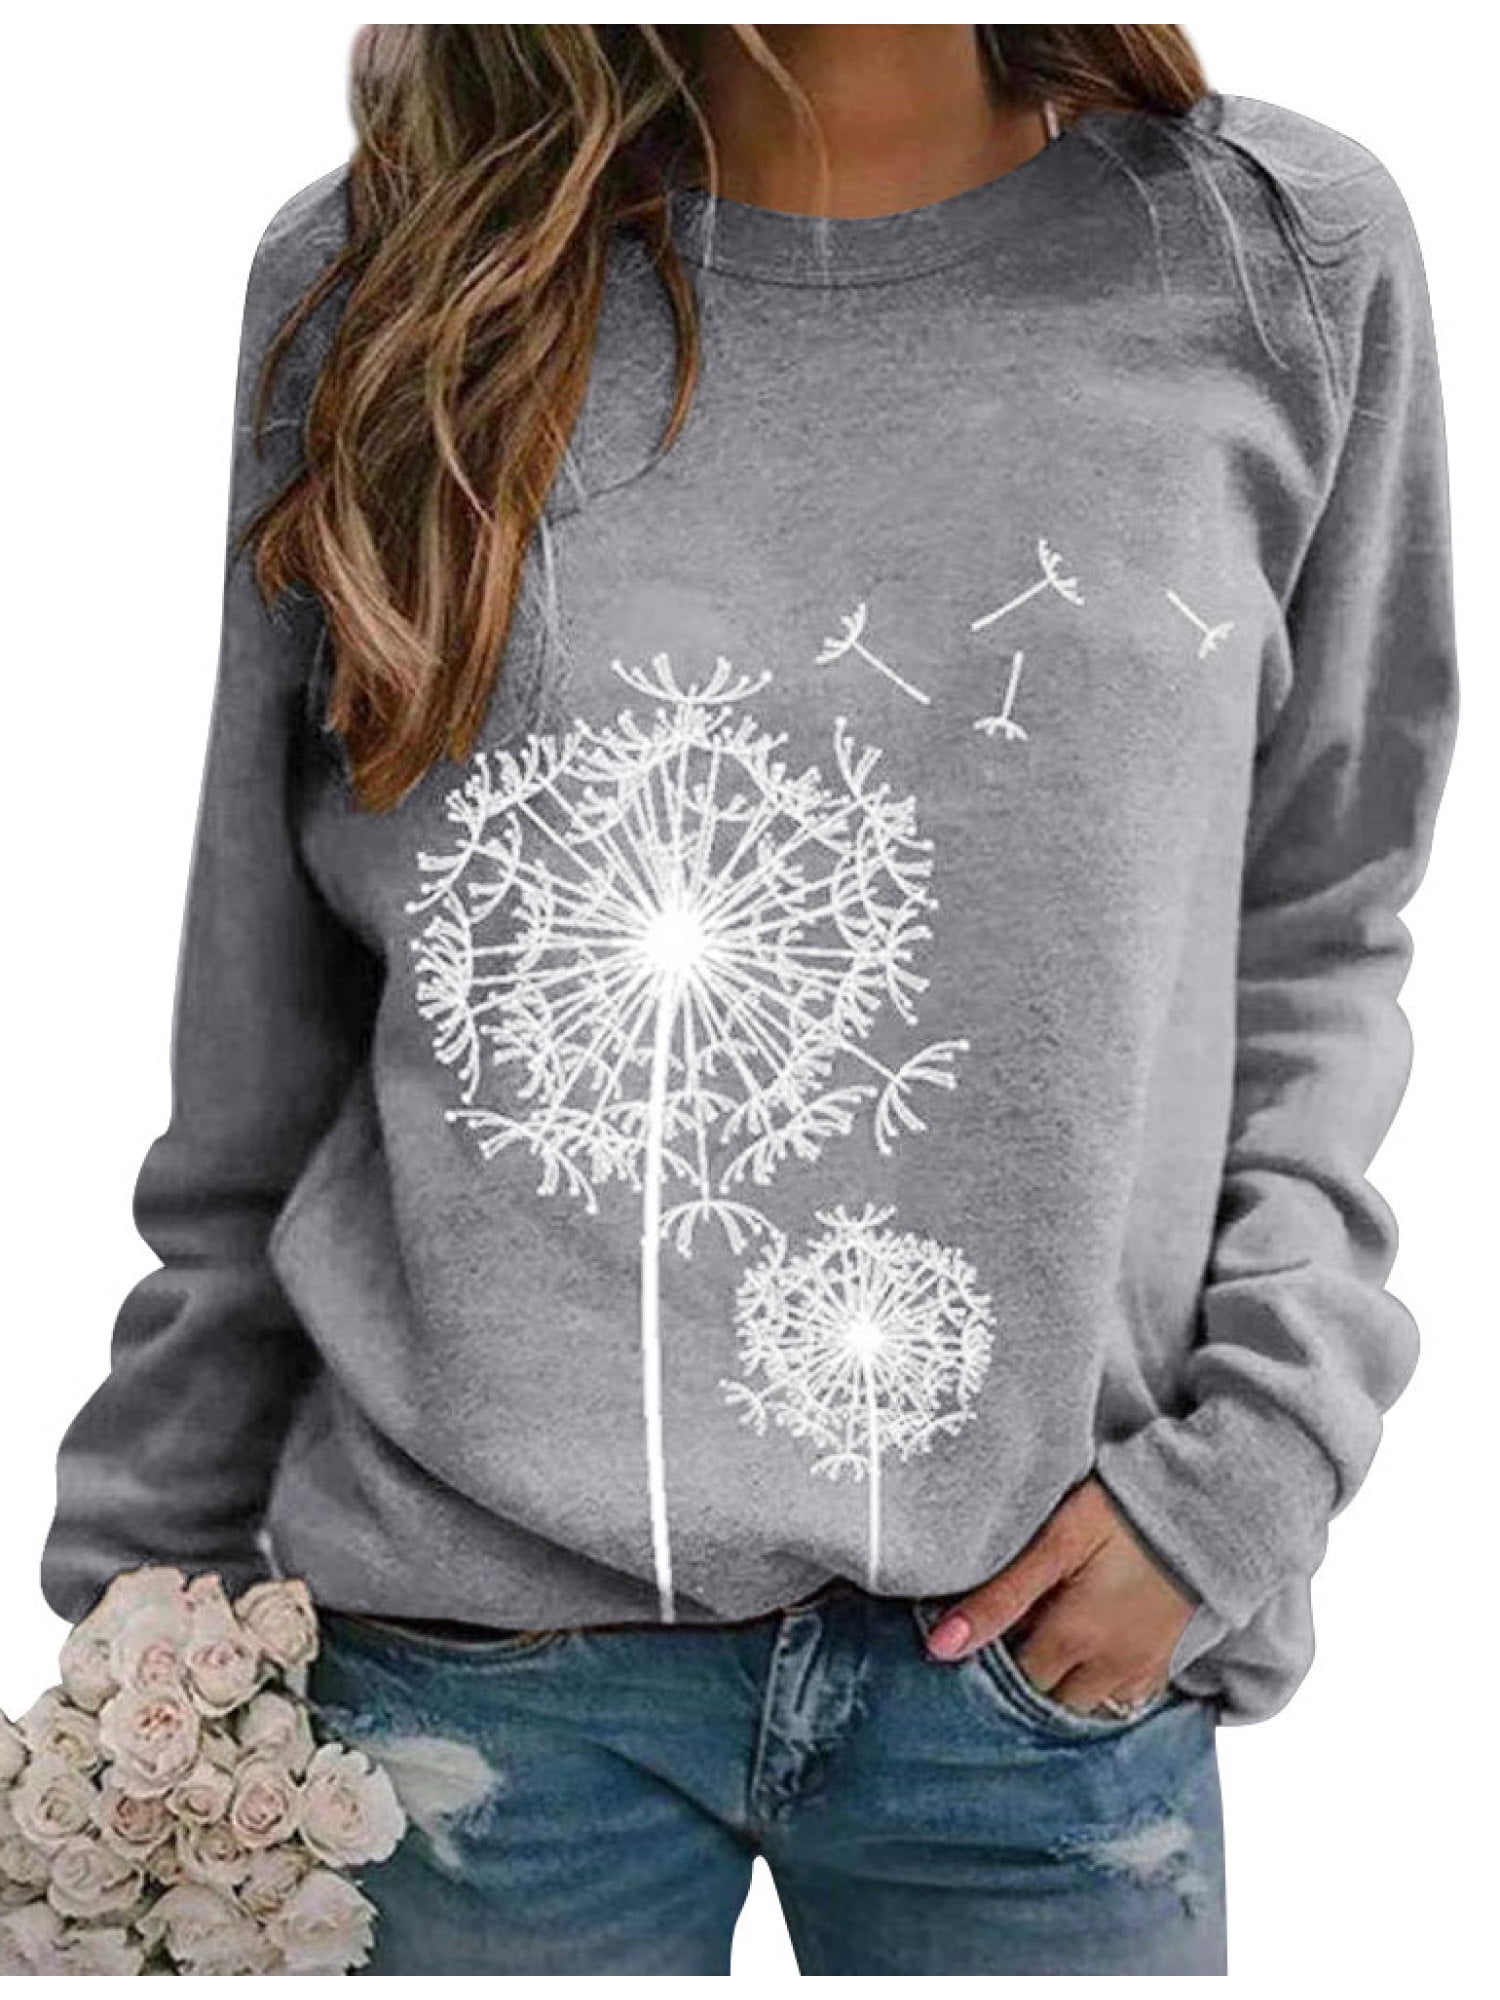 Love Crew Neck Comfy Tees Shirts Top Dandelion with Hearts Womens Crewneck Long Sleeve XX-Large